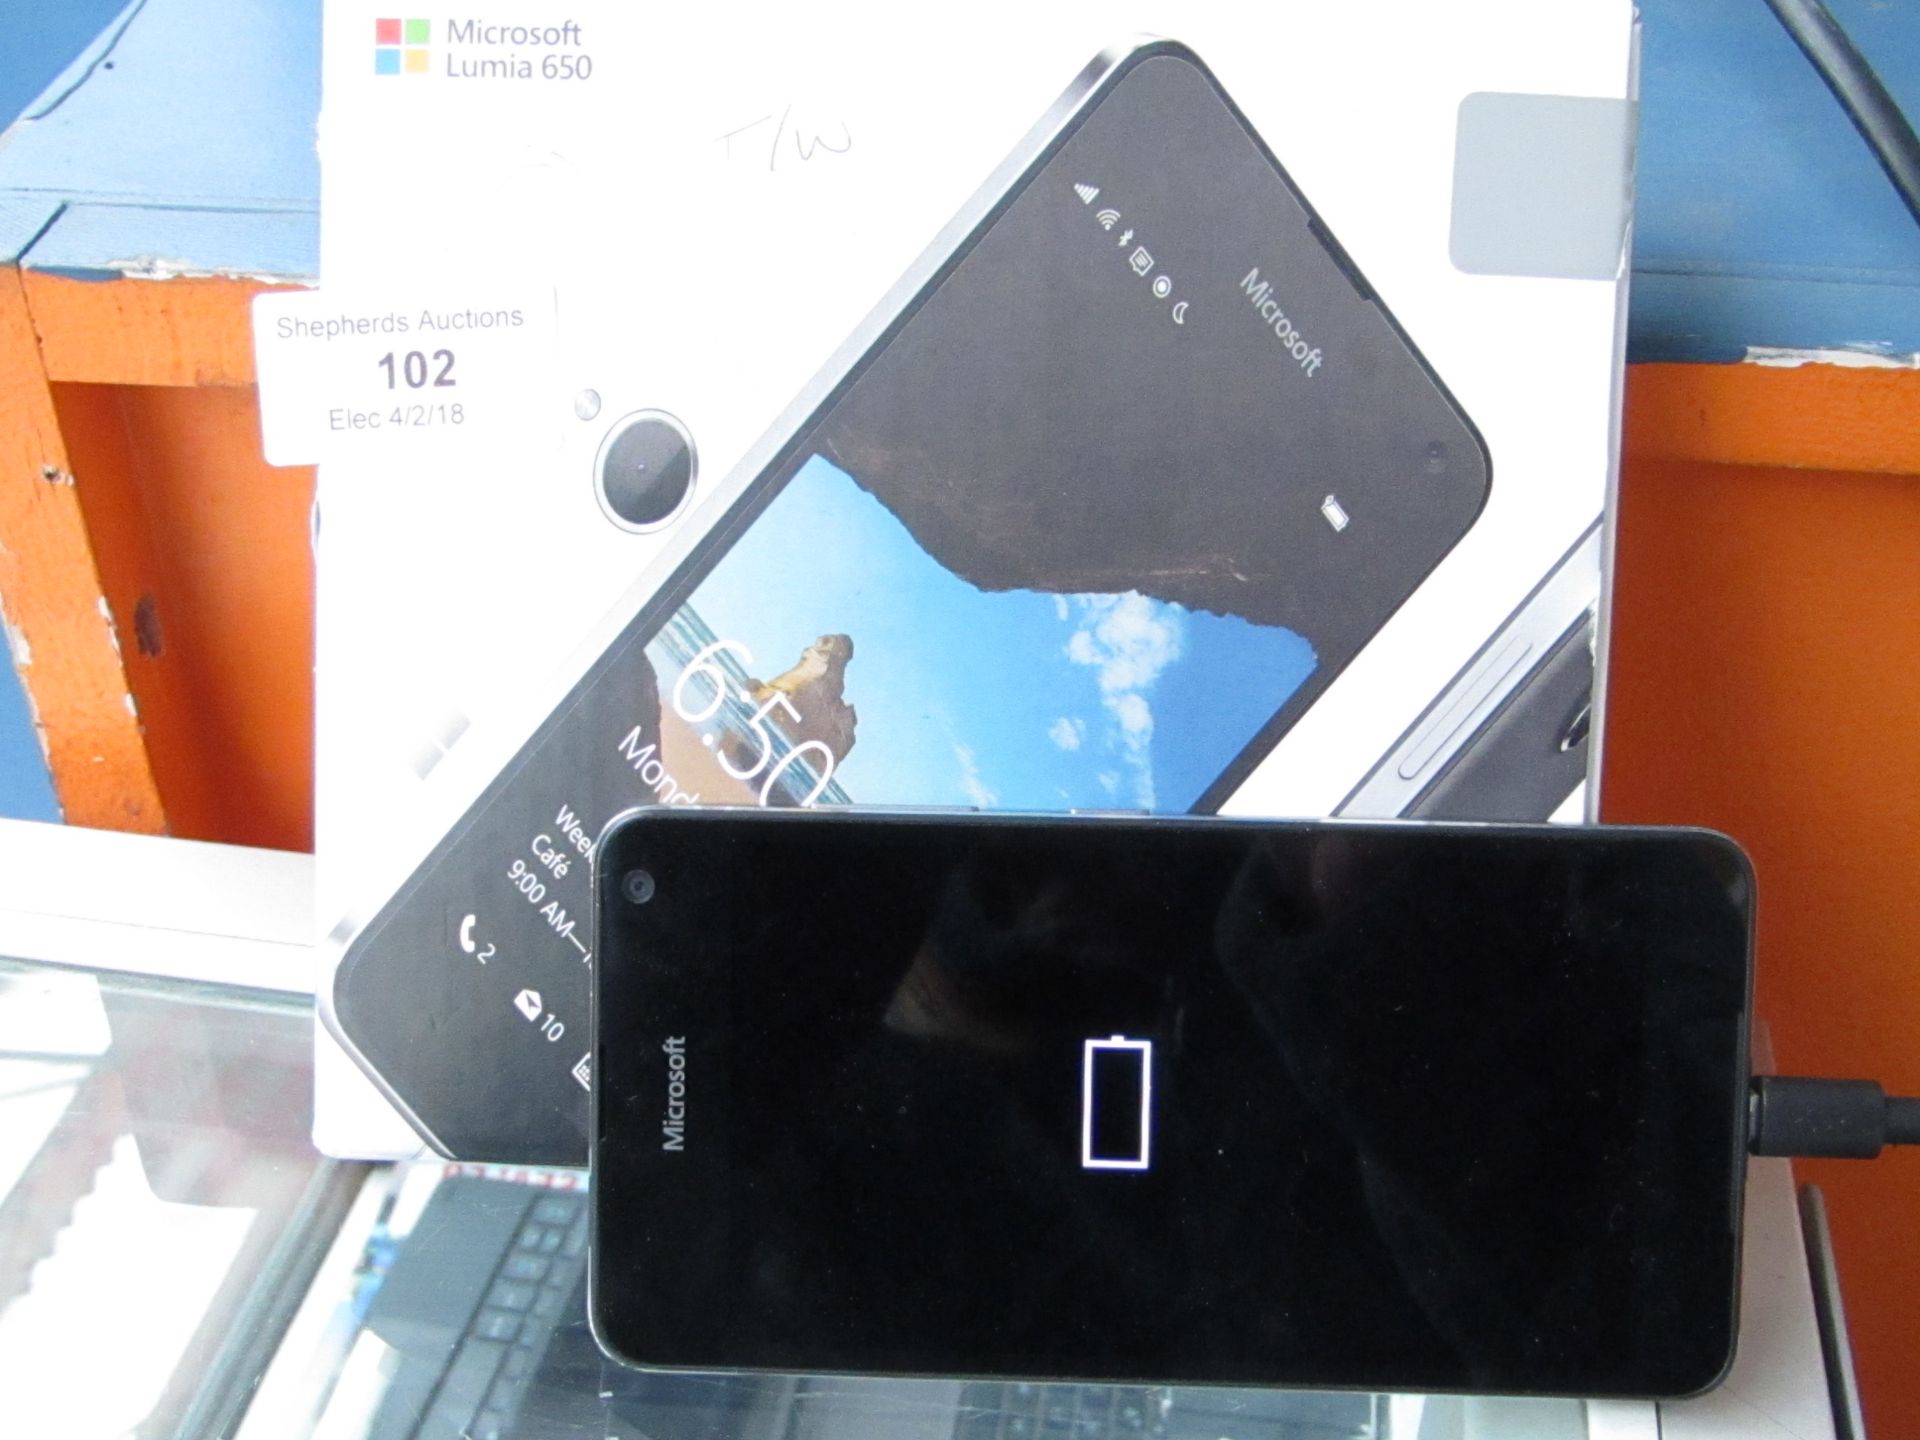 Microsoft Lumia 650 RM-1152, tested working and boxed. RRP £275